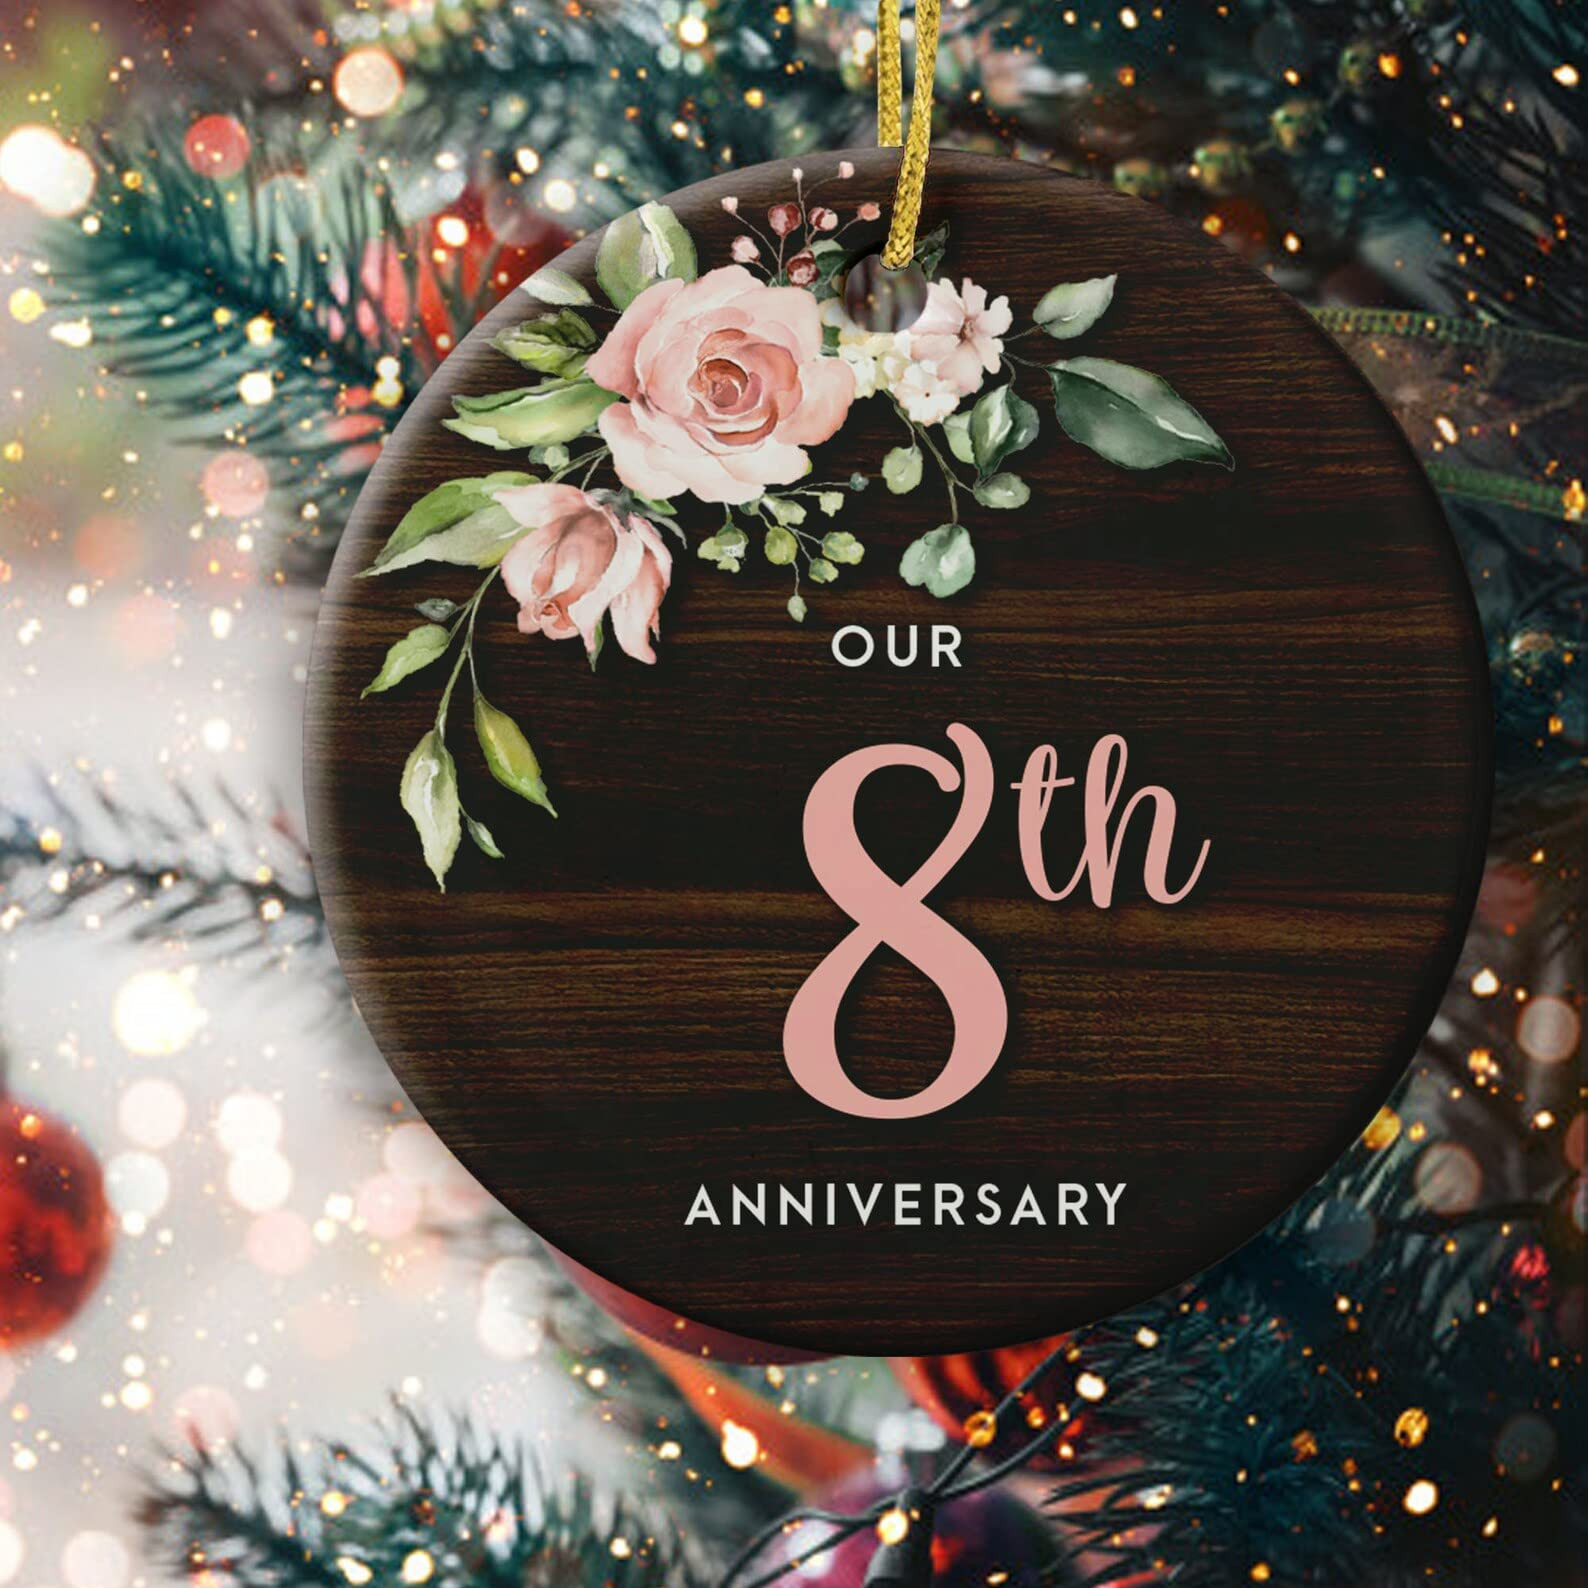 8 Years Christmas Ornament Our 8th Anniversary Ornament Wedding Ornament Wedding Gifts For Him Her Couple Gifts Christmas Ornament Hanging Decor Xmas Tree Decoration